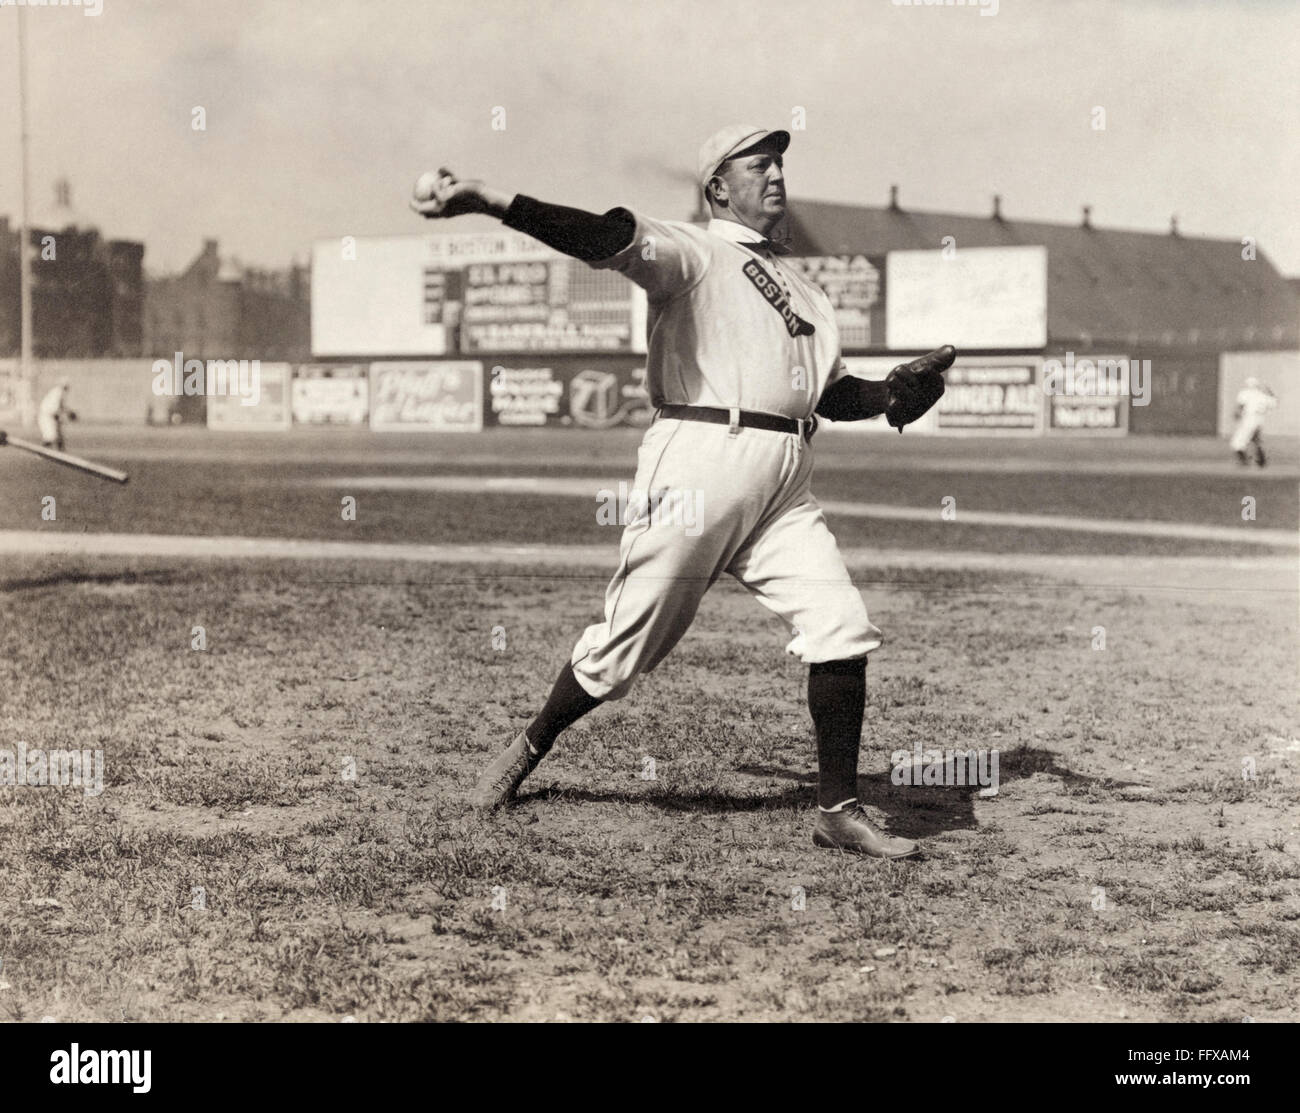 CY YOUNG (1867-1955). /nDenton True 'Cy' Young. American baseball pitcher. Photographed while playing with the Boston Red Sox, 1908. Stock Photo